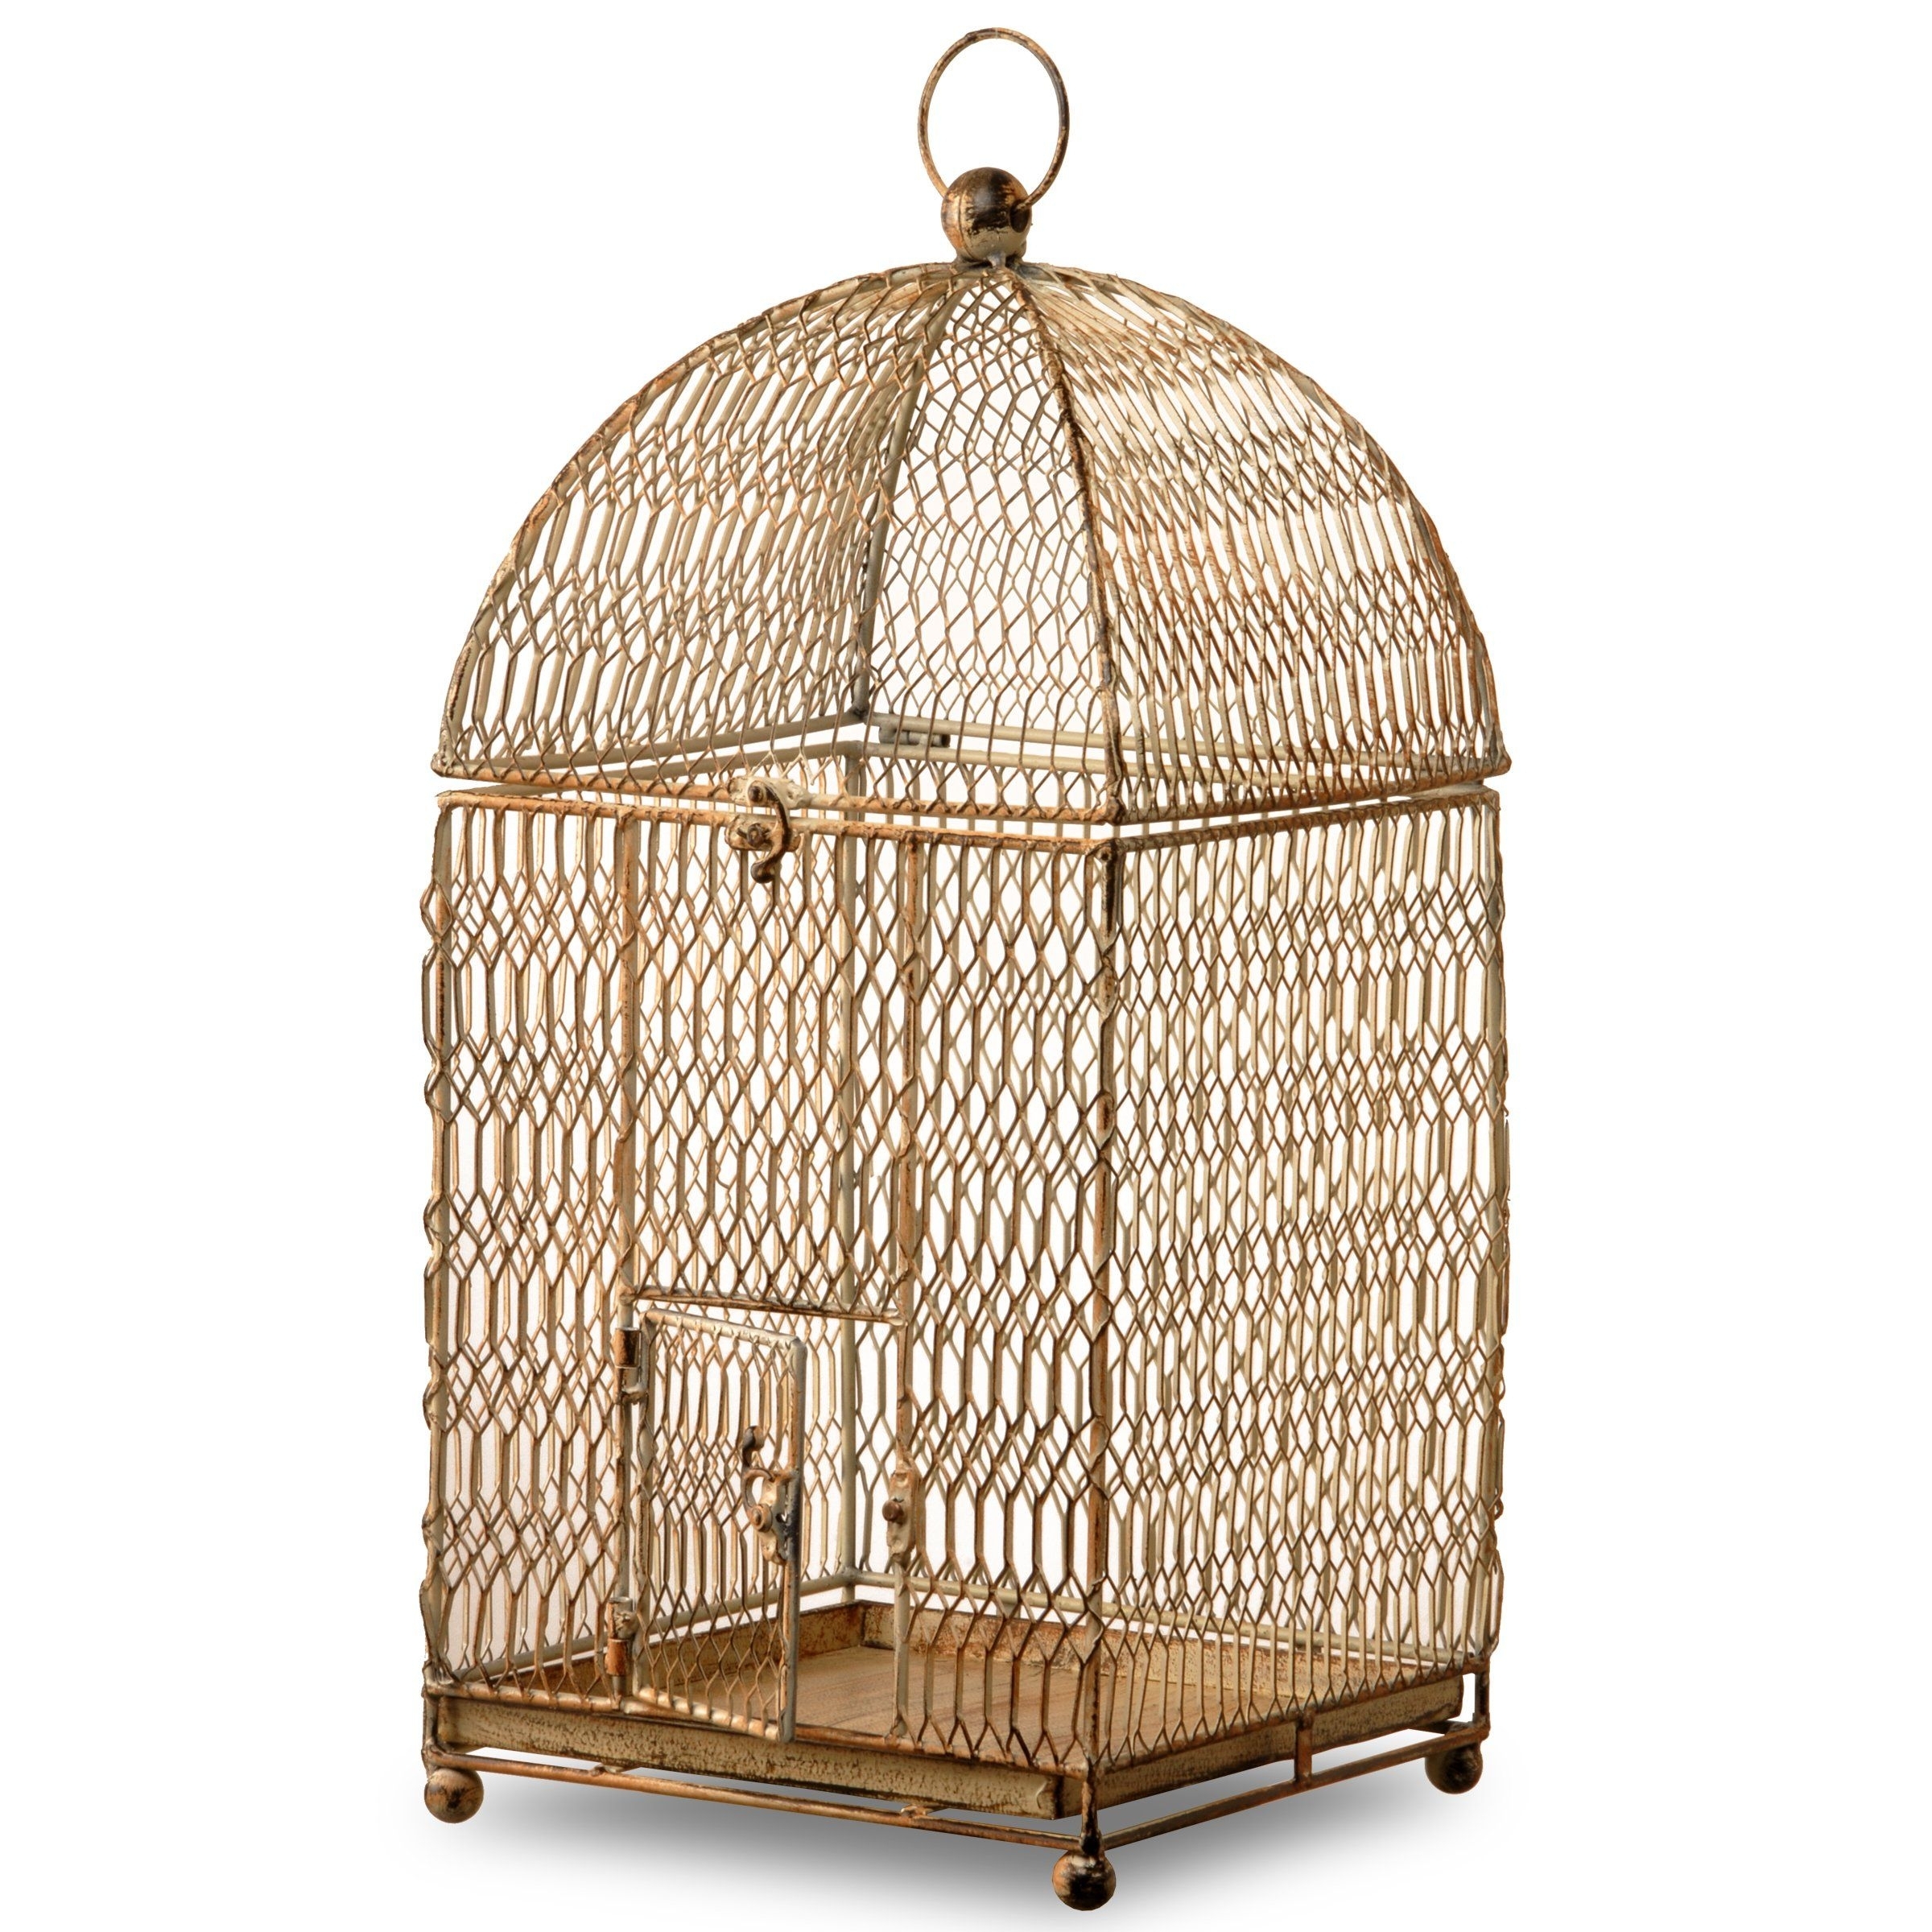 FOUND in ITHACA » Vintage Hendryx Bird Cage with Perches and Two